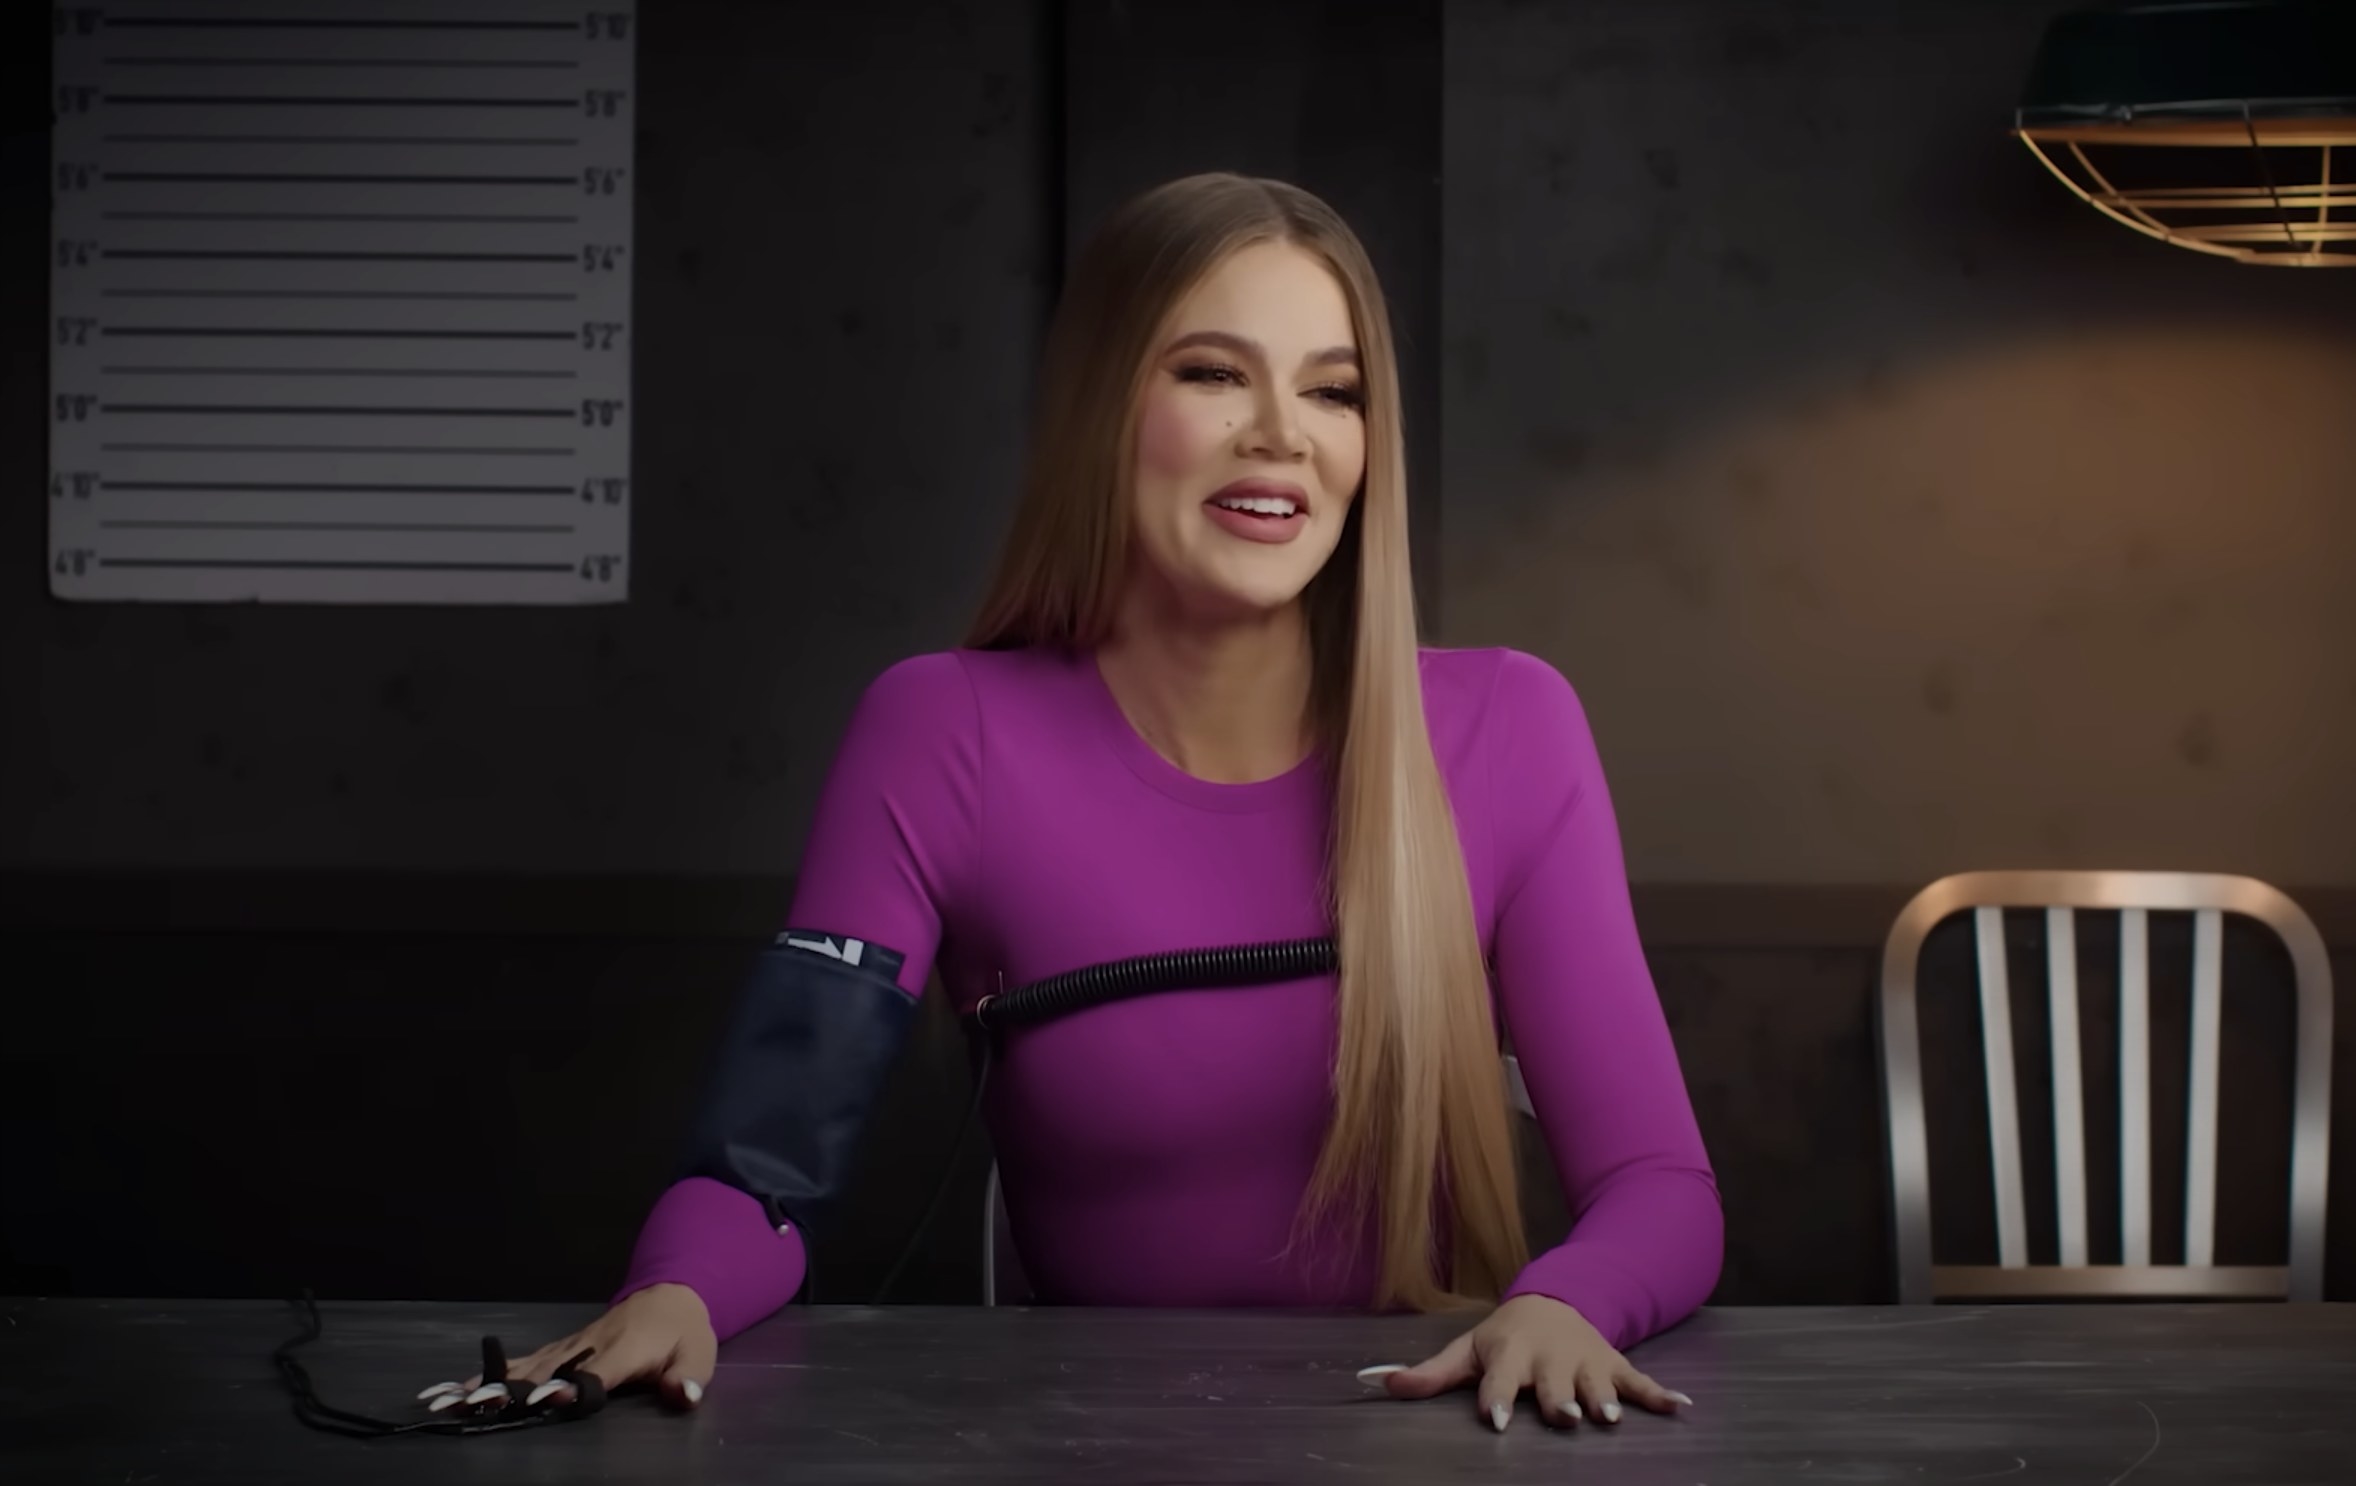 Khloe hooked up to a lie detector machine